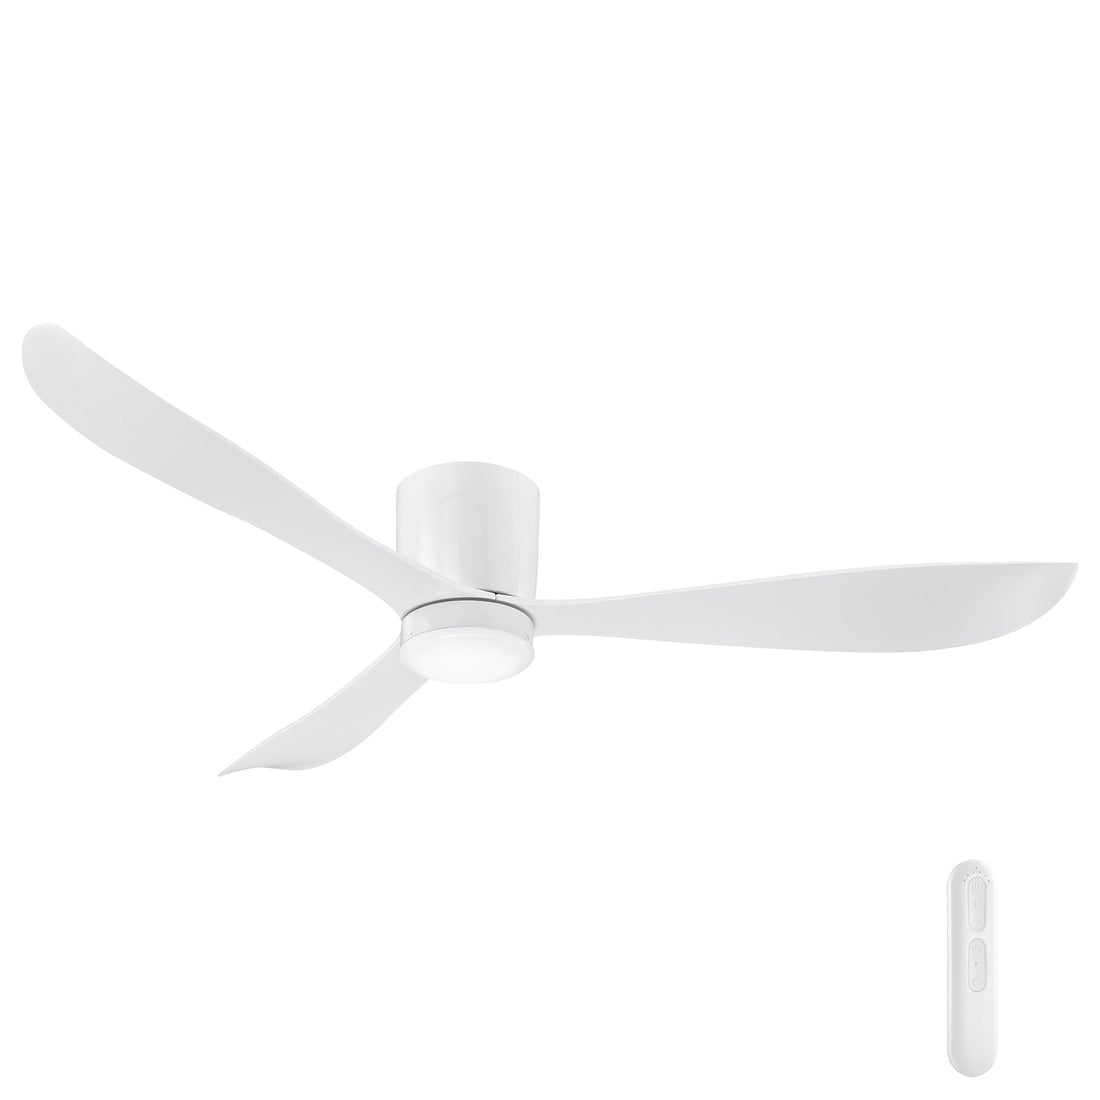 Instinct DC Ceiling Fan with LED Light and Remote Mercator